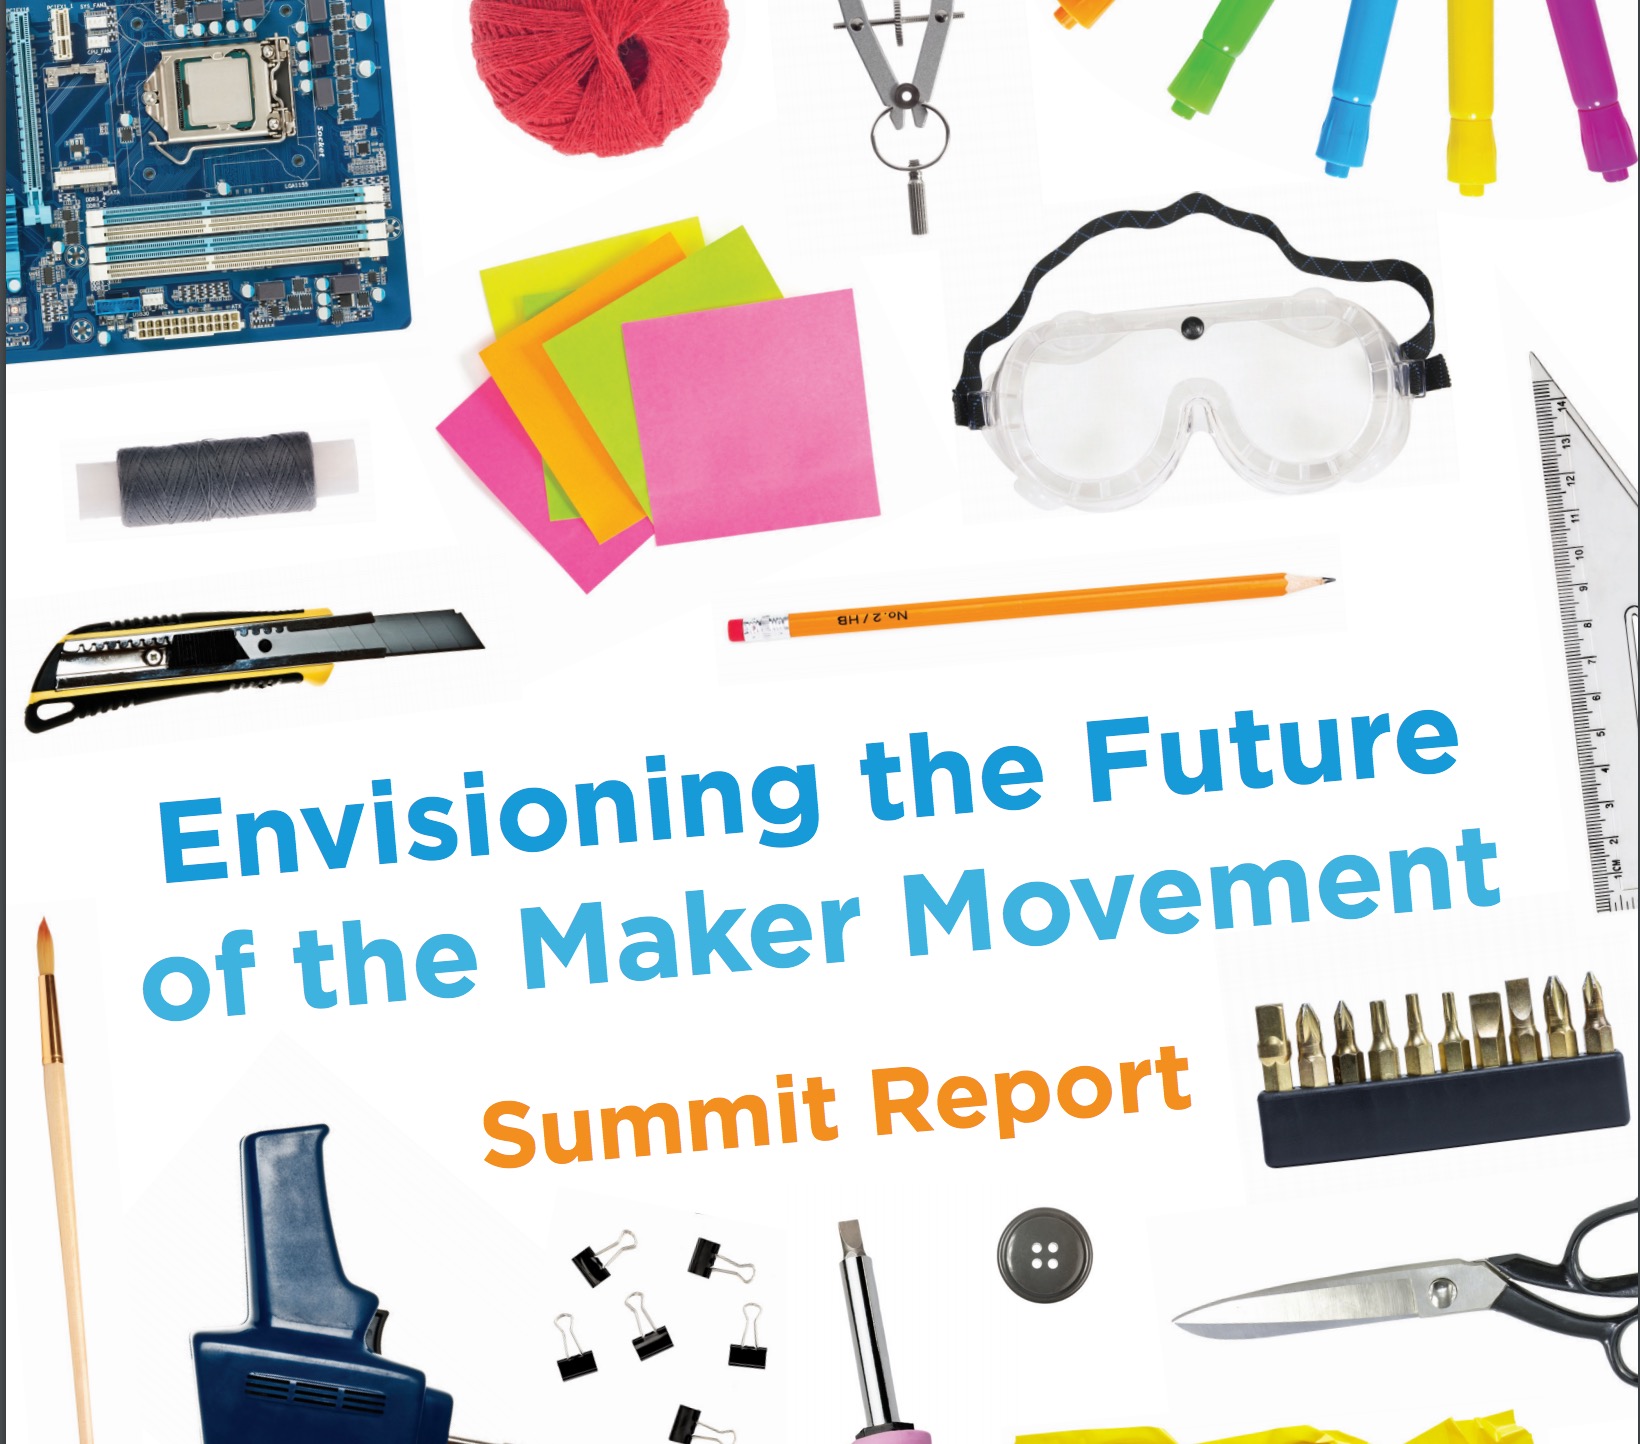 Making and Engineering Education